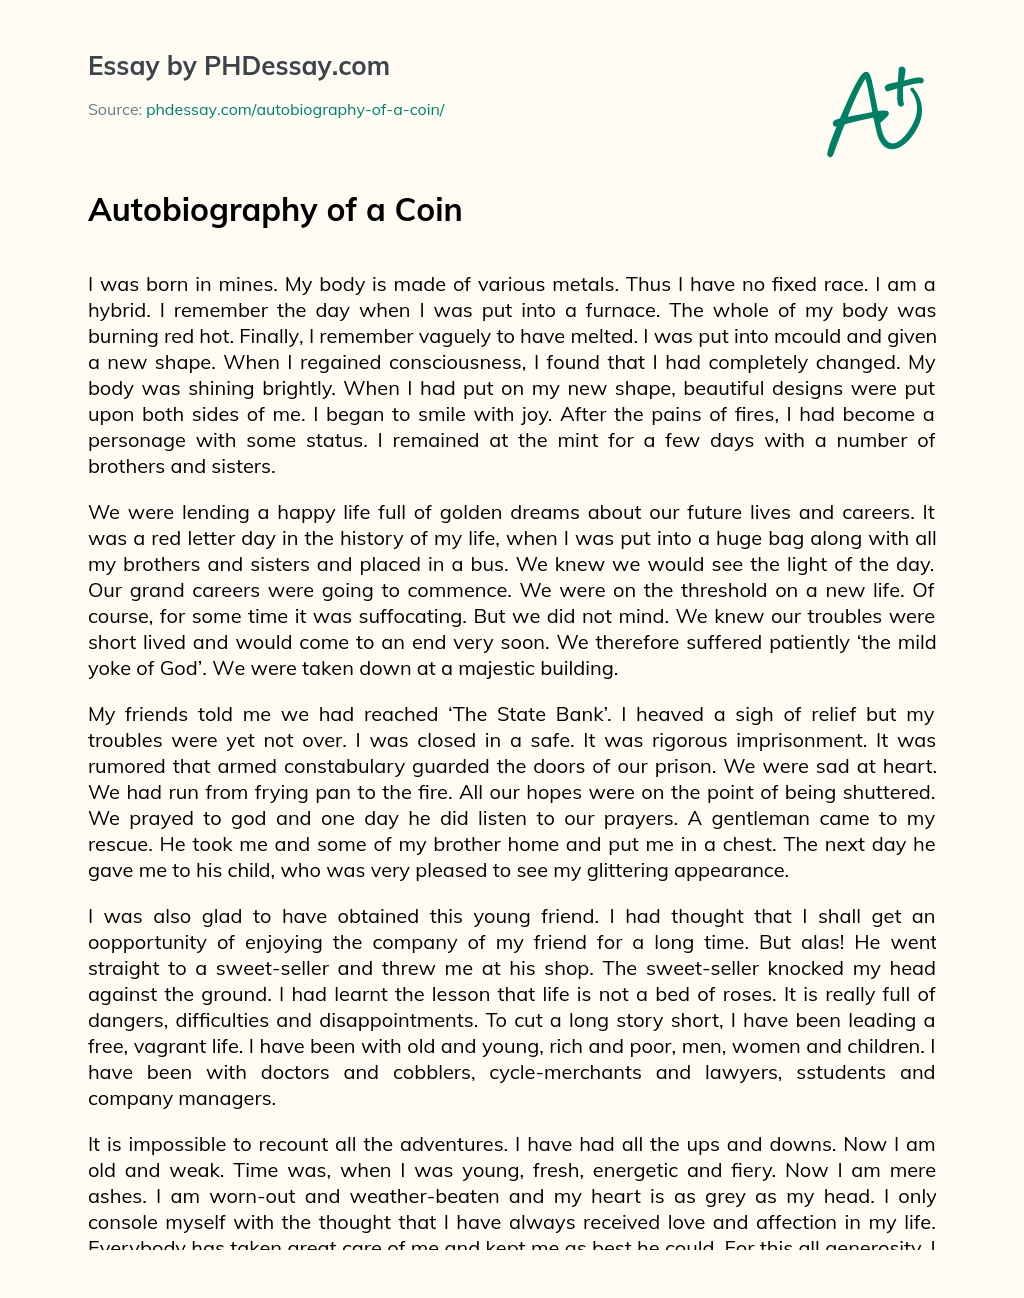 Autobiography of a Coin essay